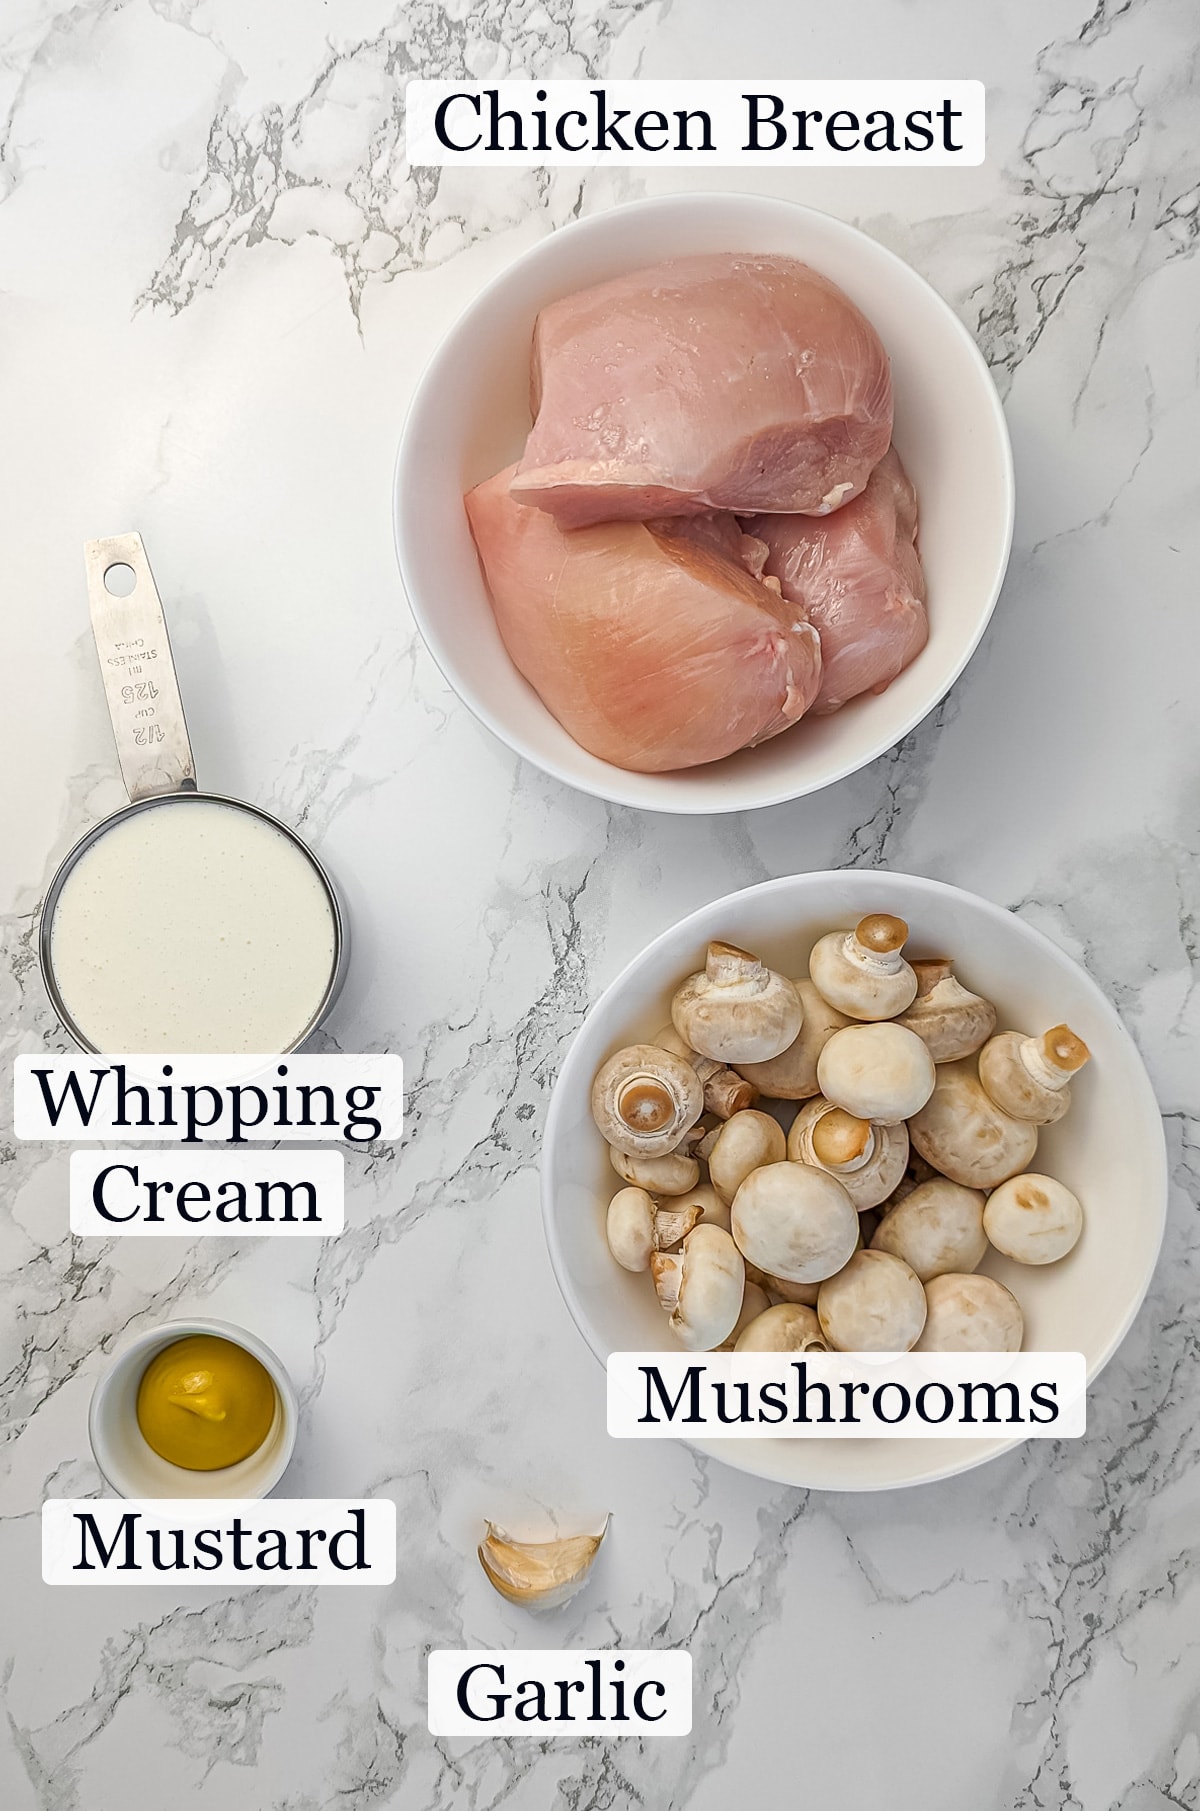 Ingredients for a creamy mushroom sauce recipe on a marble countertop, including chicken breasts, whole mushrooms, heavy cream, olive oil, and garlic.